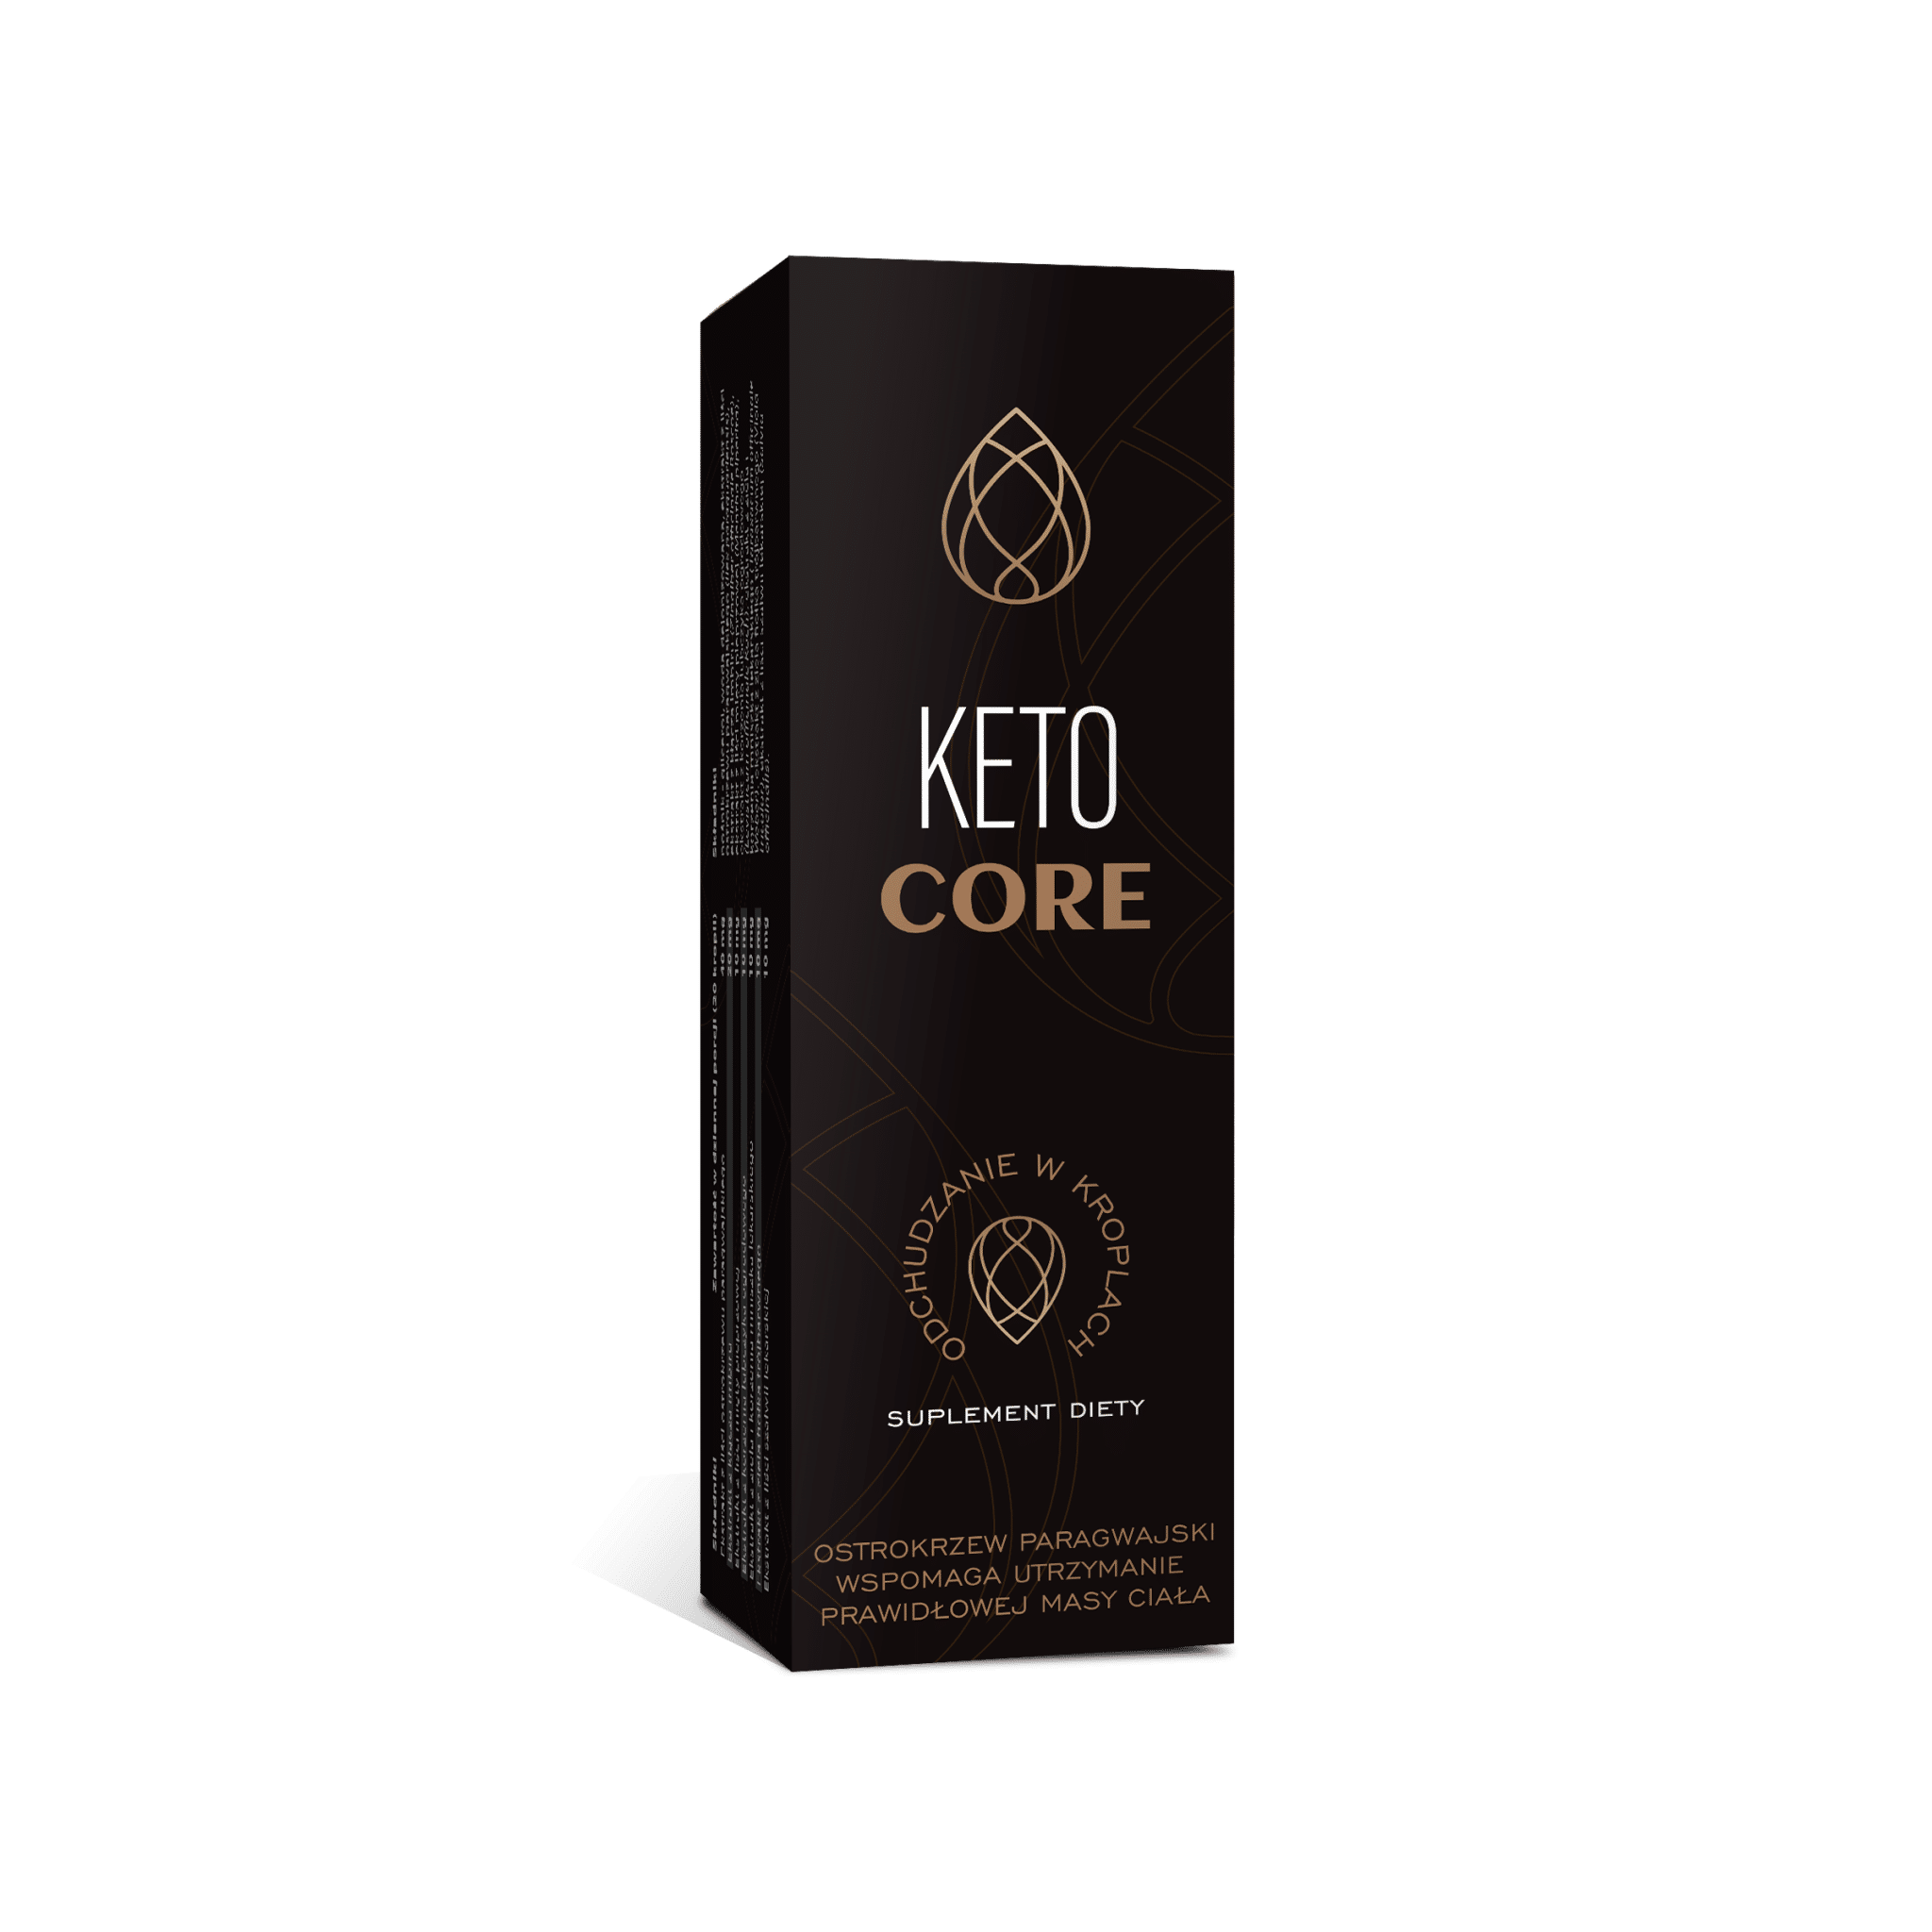 Keto Core Product Overview. What Is It?